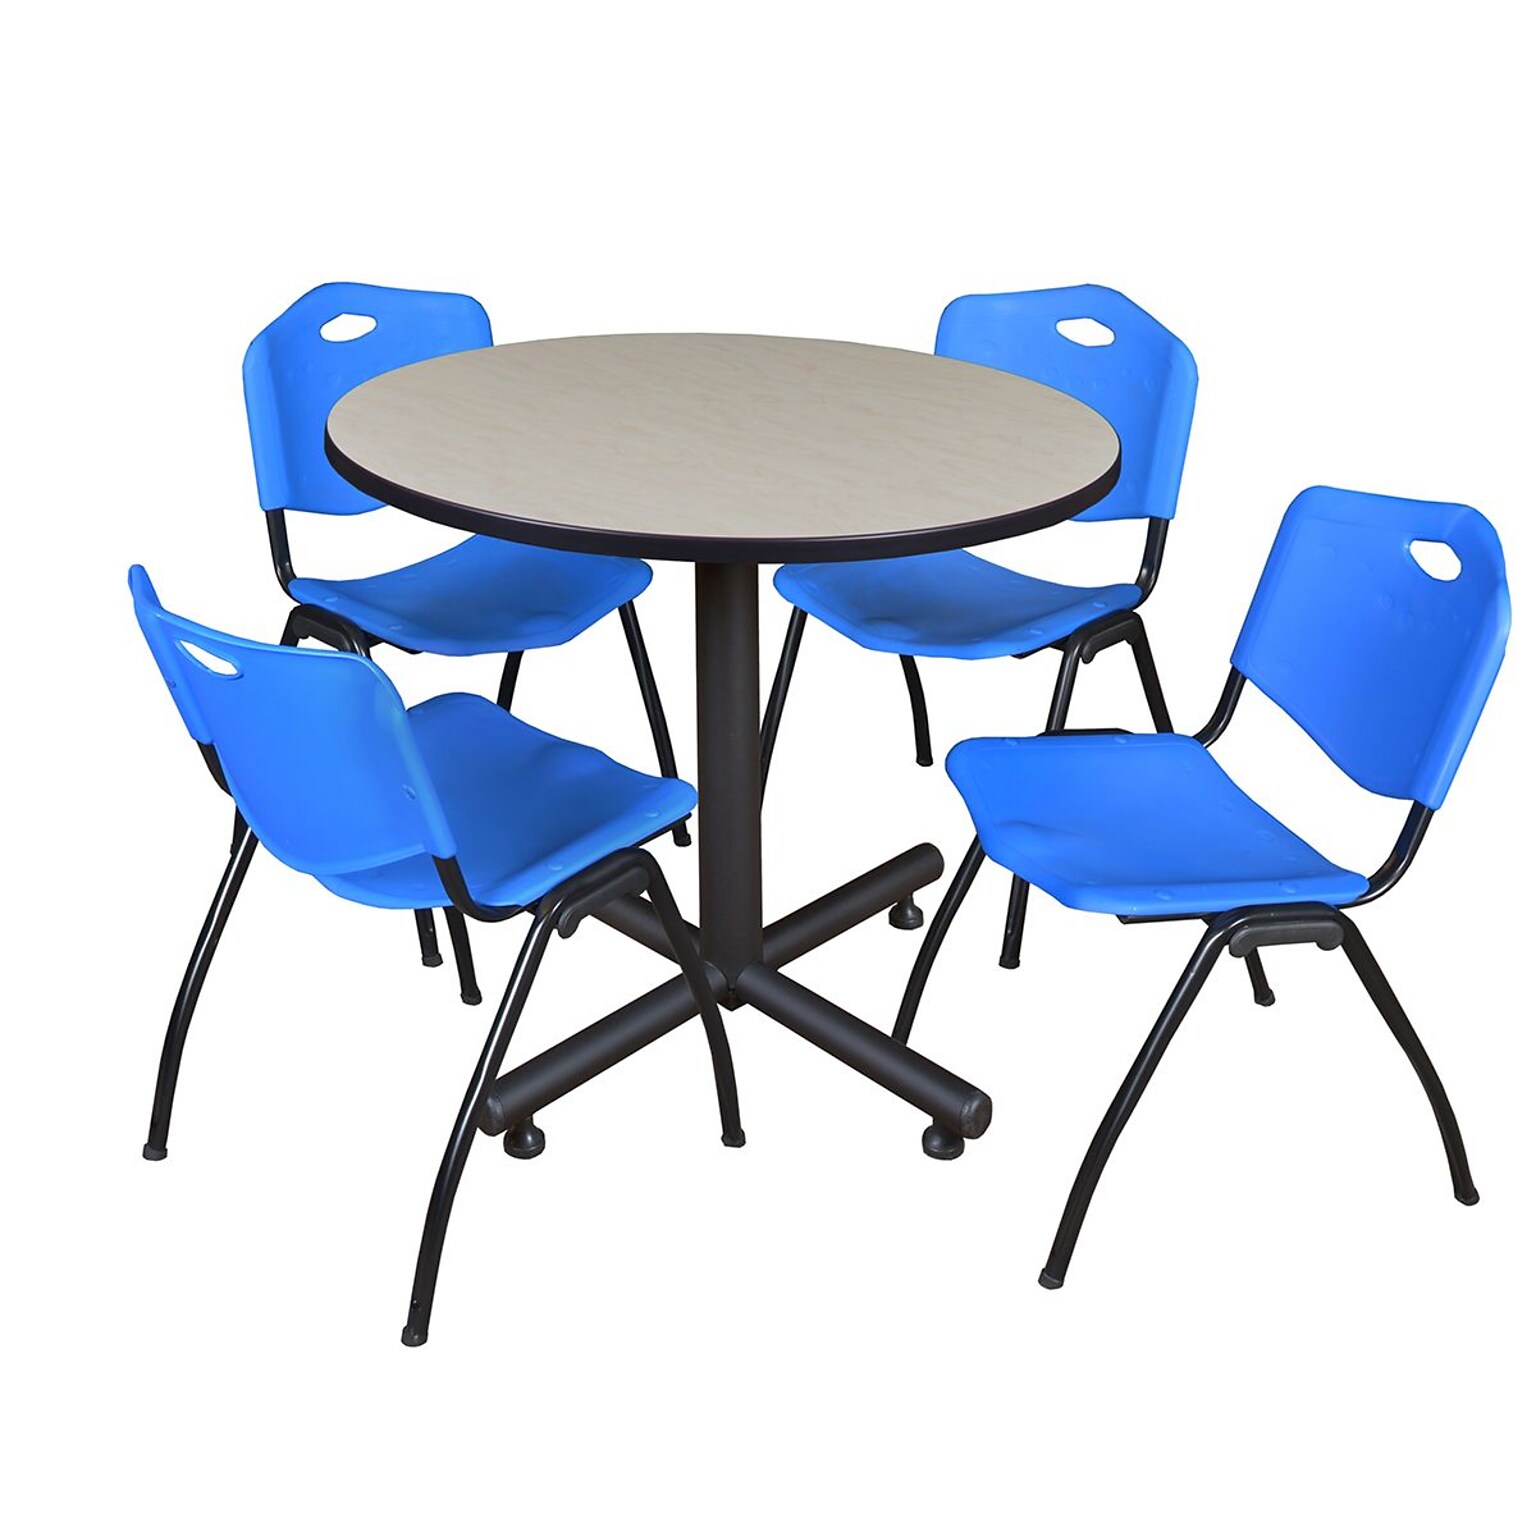 Regency 36-inch Round Laminate Maple Training Rooms Table with 4 M Stacker Chairs, Blue (TKB36RNDPL47BE)